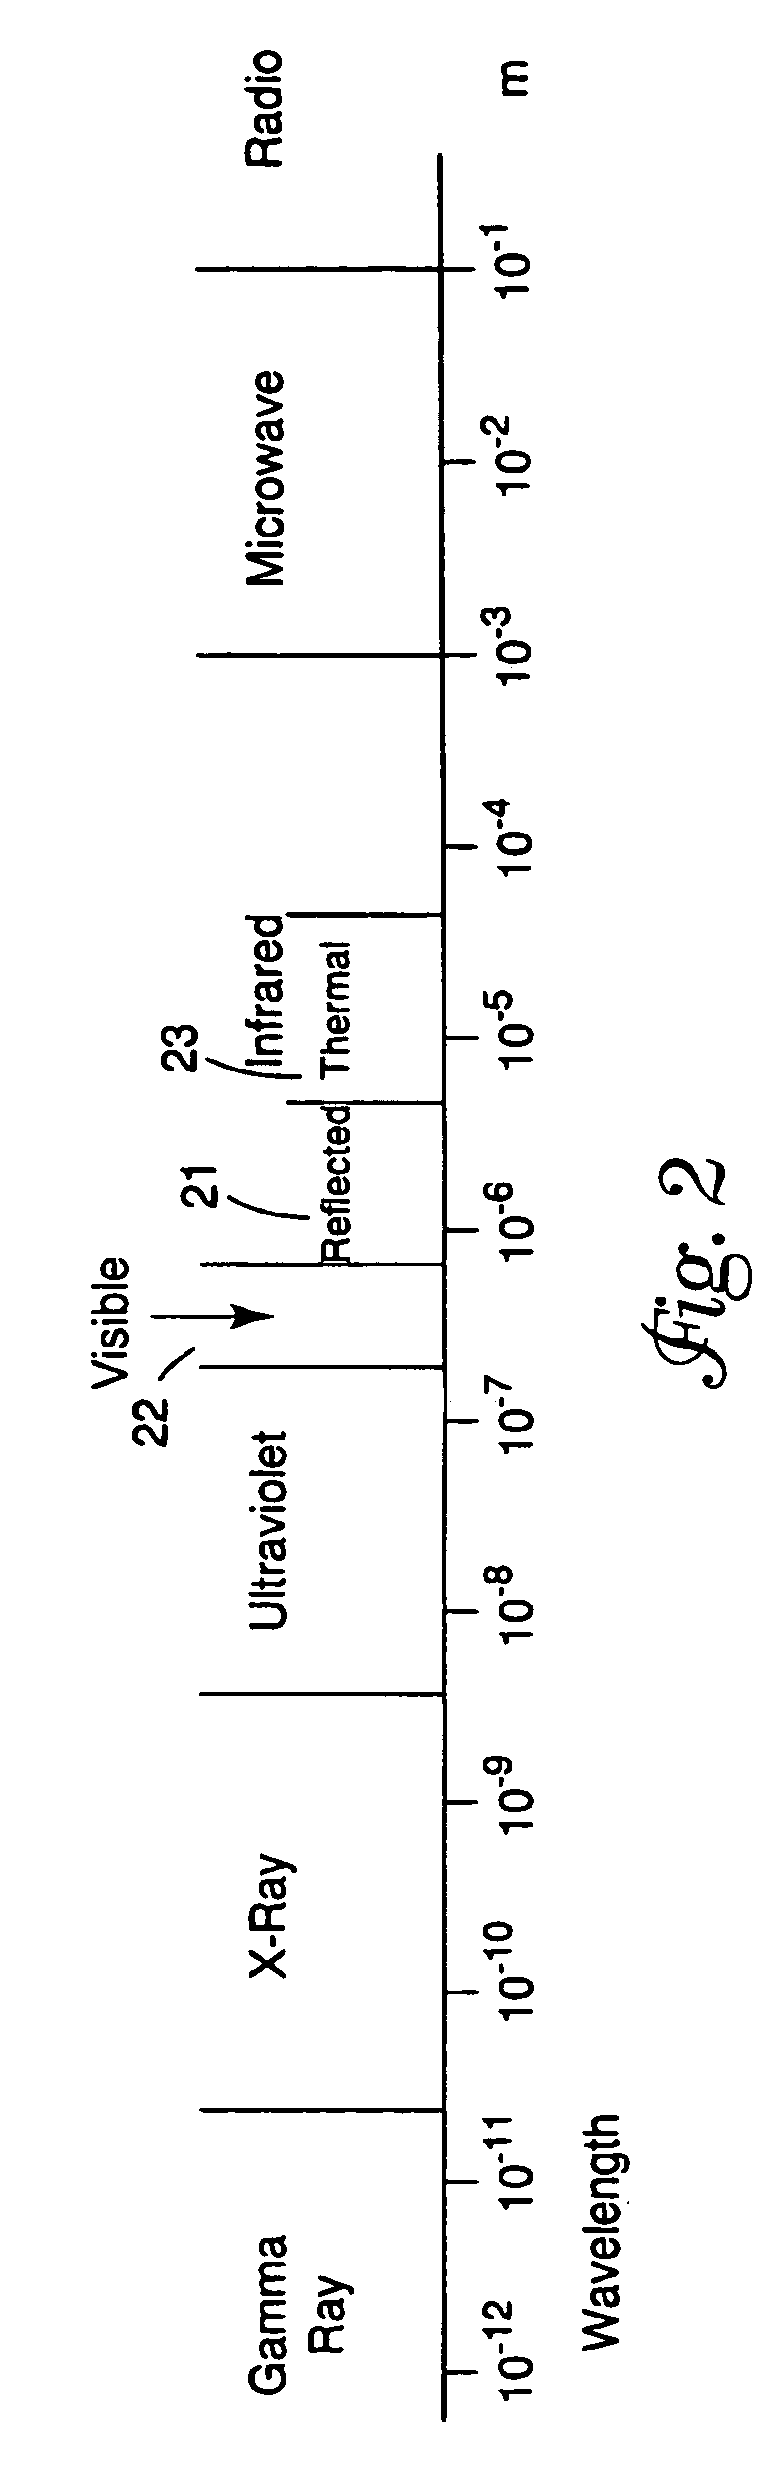 Detection system and method using thermal image analysis